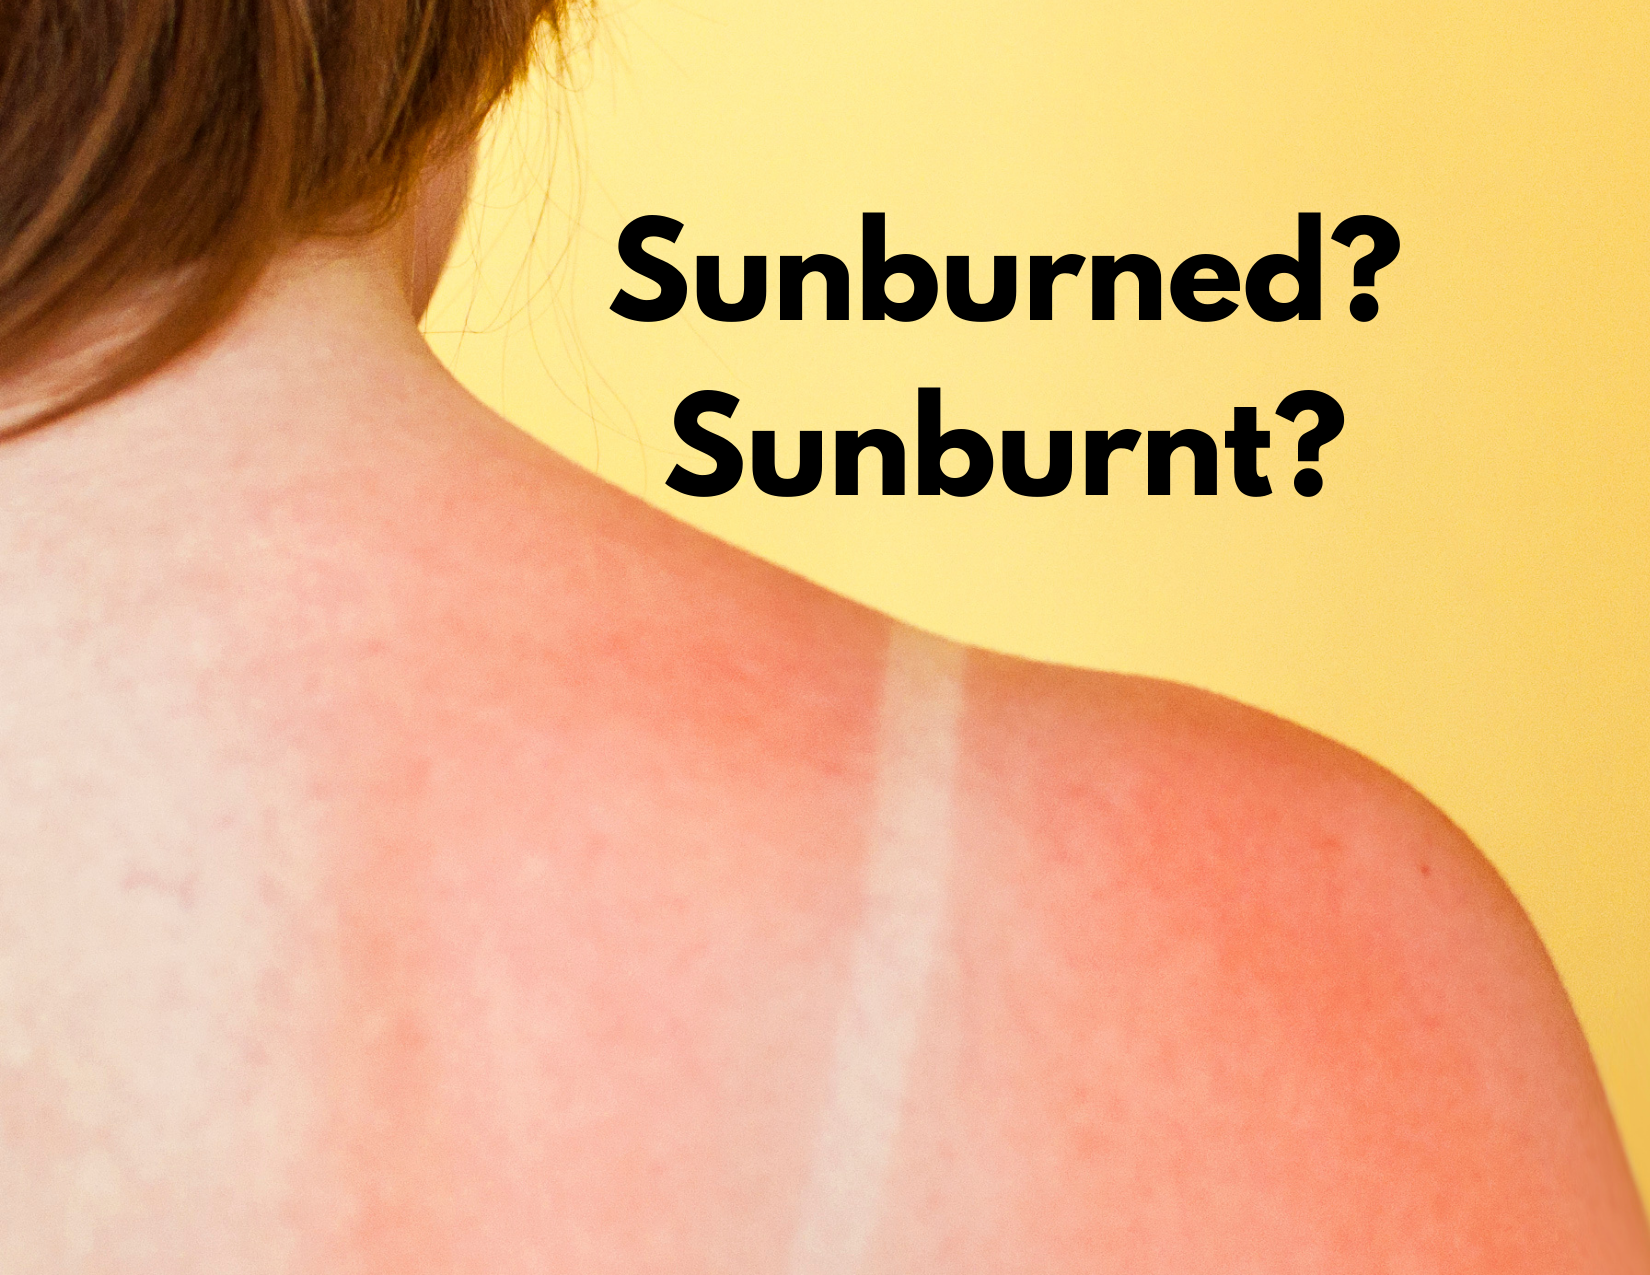 A picture of a woman with a sunburn and the words sunburned or sunburnt?